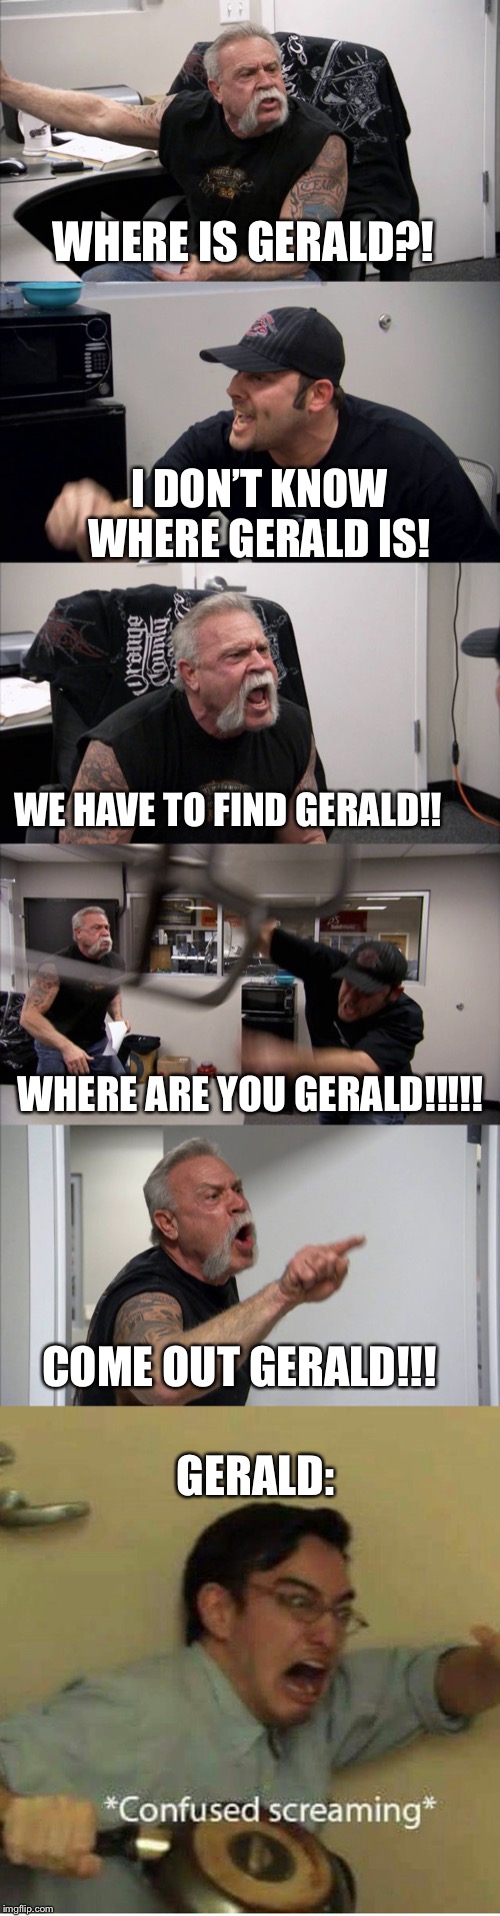 WHERE IS GERALD?! I DON’T KNOW WHERE GERALD IS! WE HAVE TO FIND GERALD!! WHERE ARE YOU GERALD!!!!! GERALD:; COME OUT GERALD!!! | image tagged in confused screaming,memes,american chopper argument | made w/ Imgflip meme maker